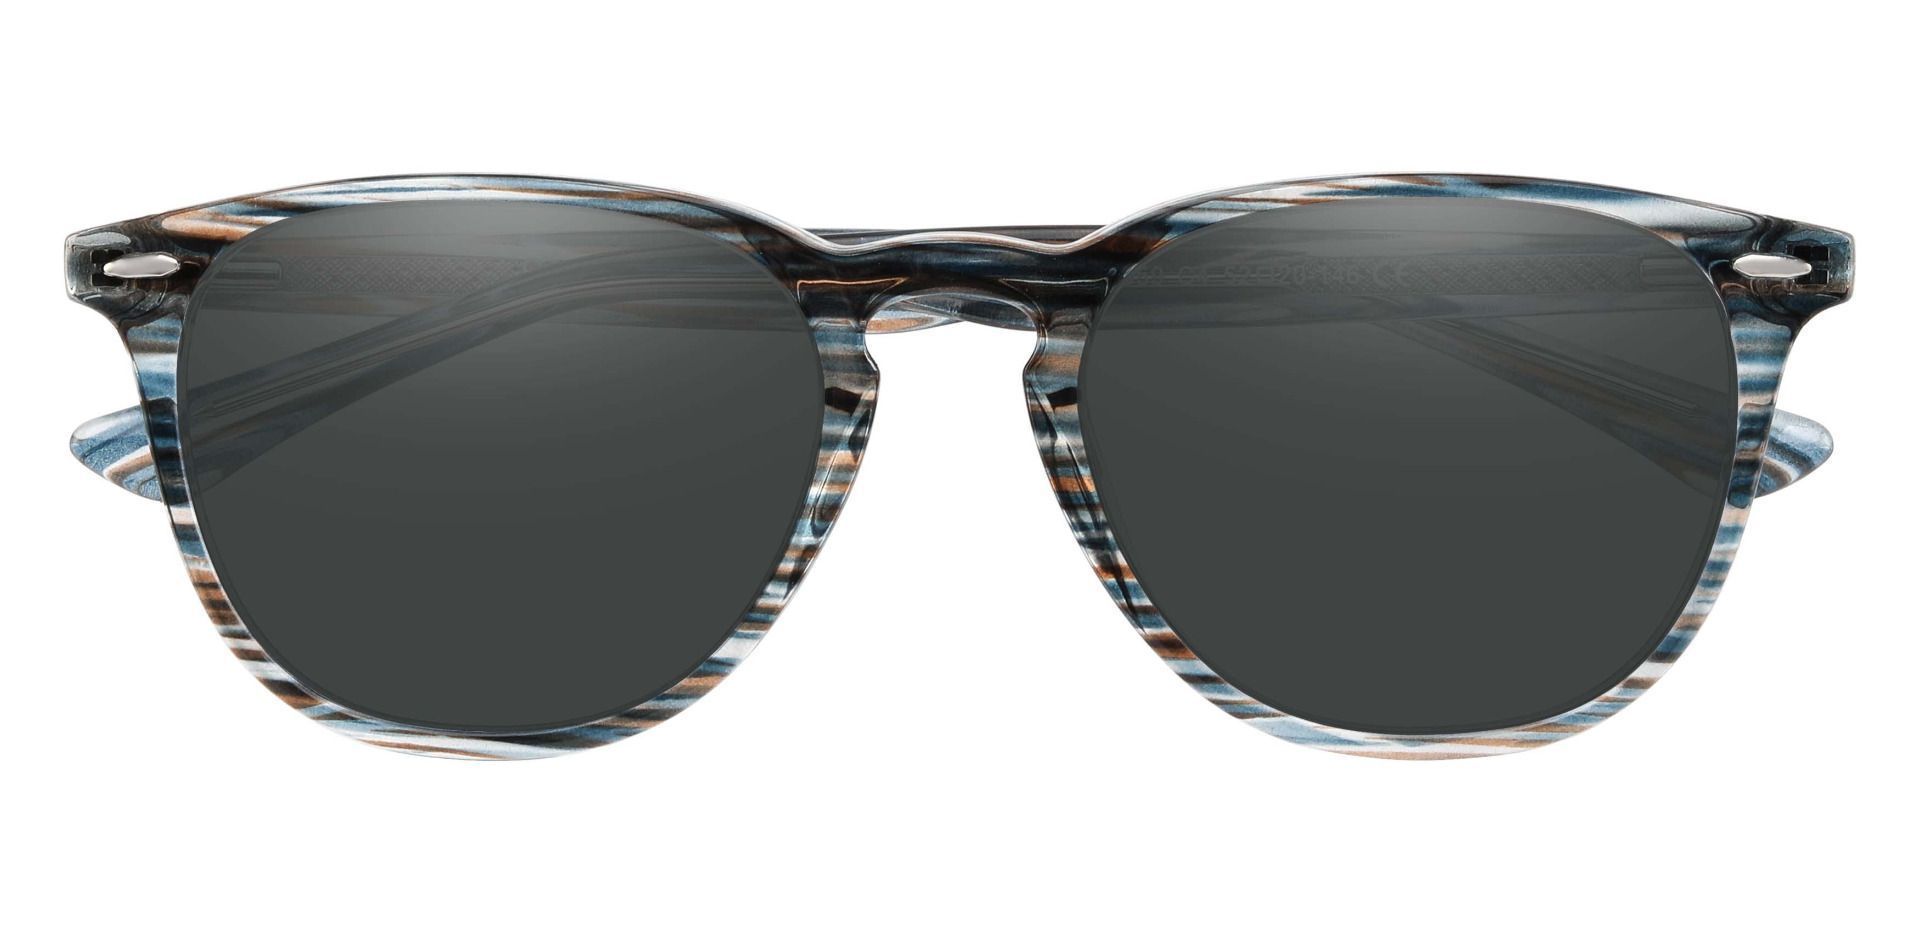 Sycamore Oval Lined Bifocal Sunglasses - Blue Frame With Gray Lenses